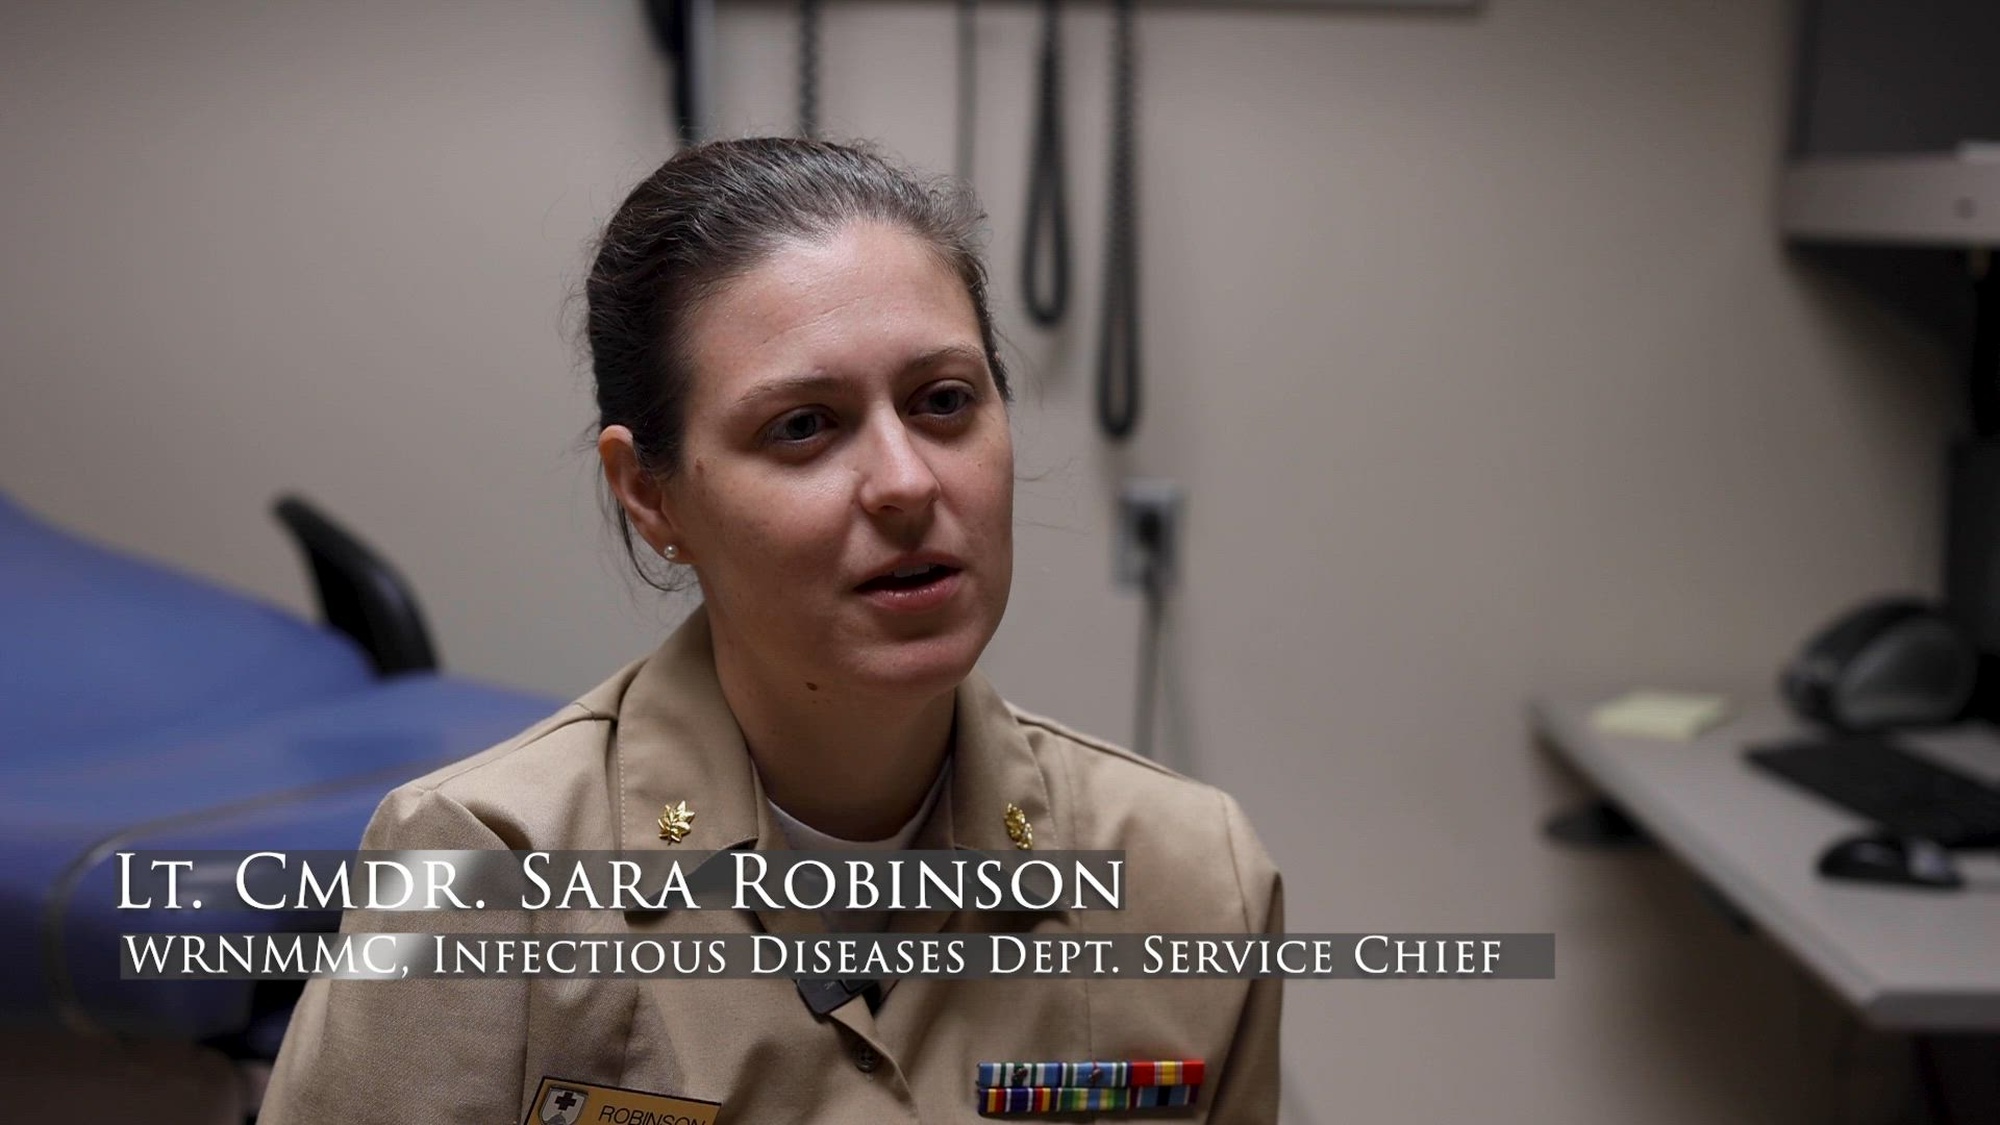 Walter Reed National Military Medical Center celebrates Bug Week with an informational video about prevention of Vector-borne illnesses. Bug Week is a time to inform and learn about vector-borne illnesses and ways to prevent them. (DoD video by Ricardo J. Reyes)